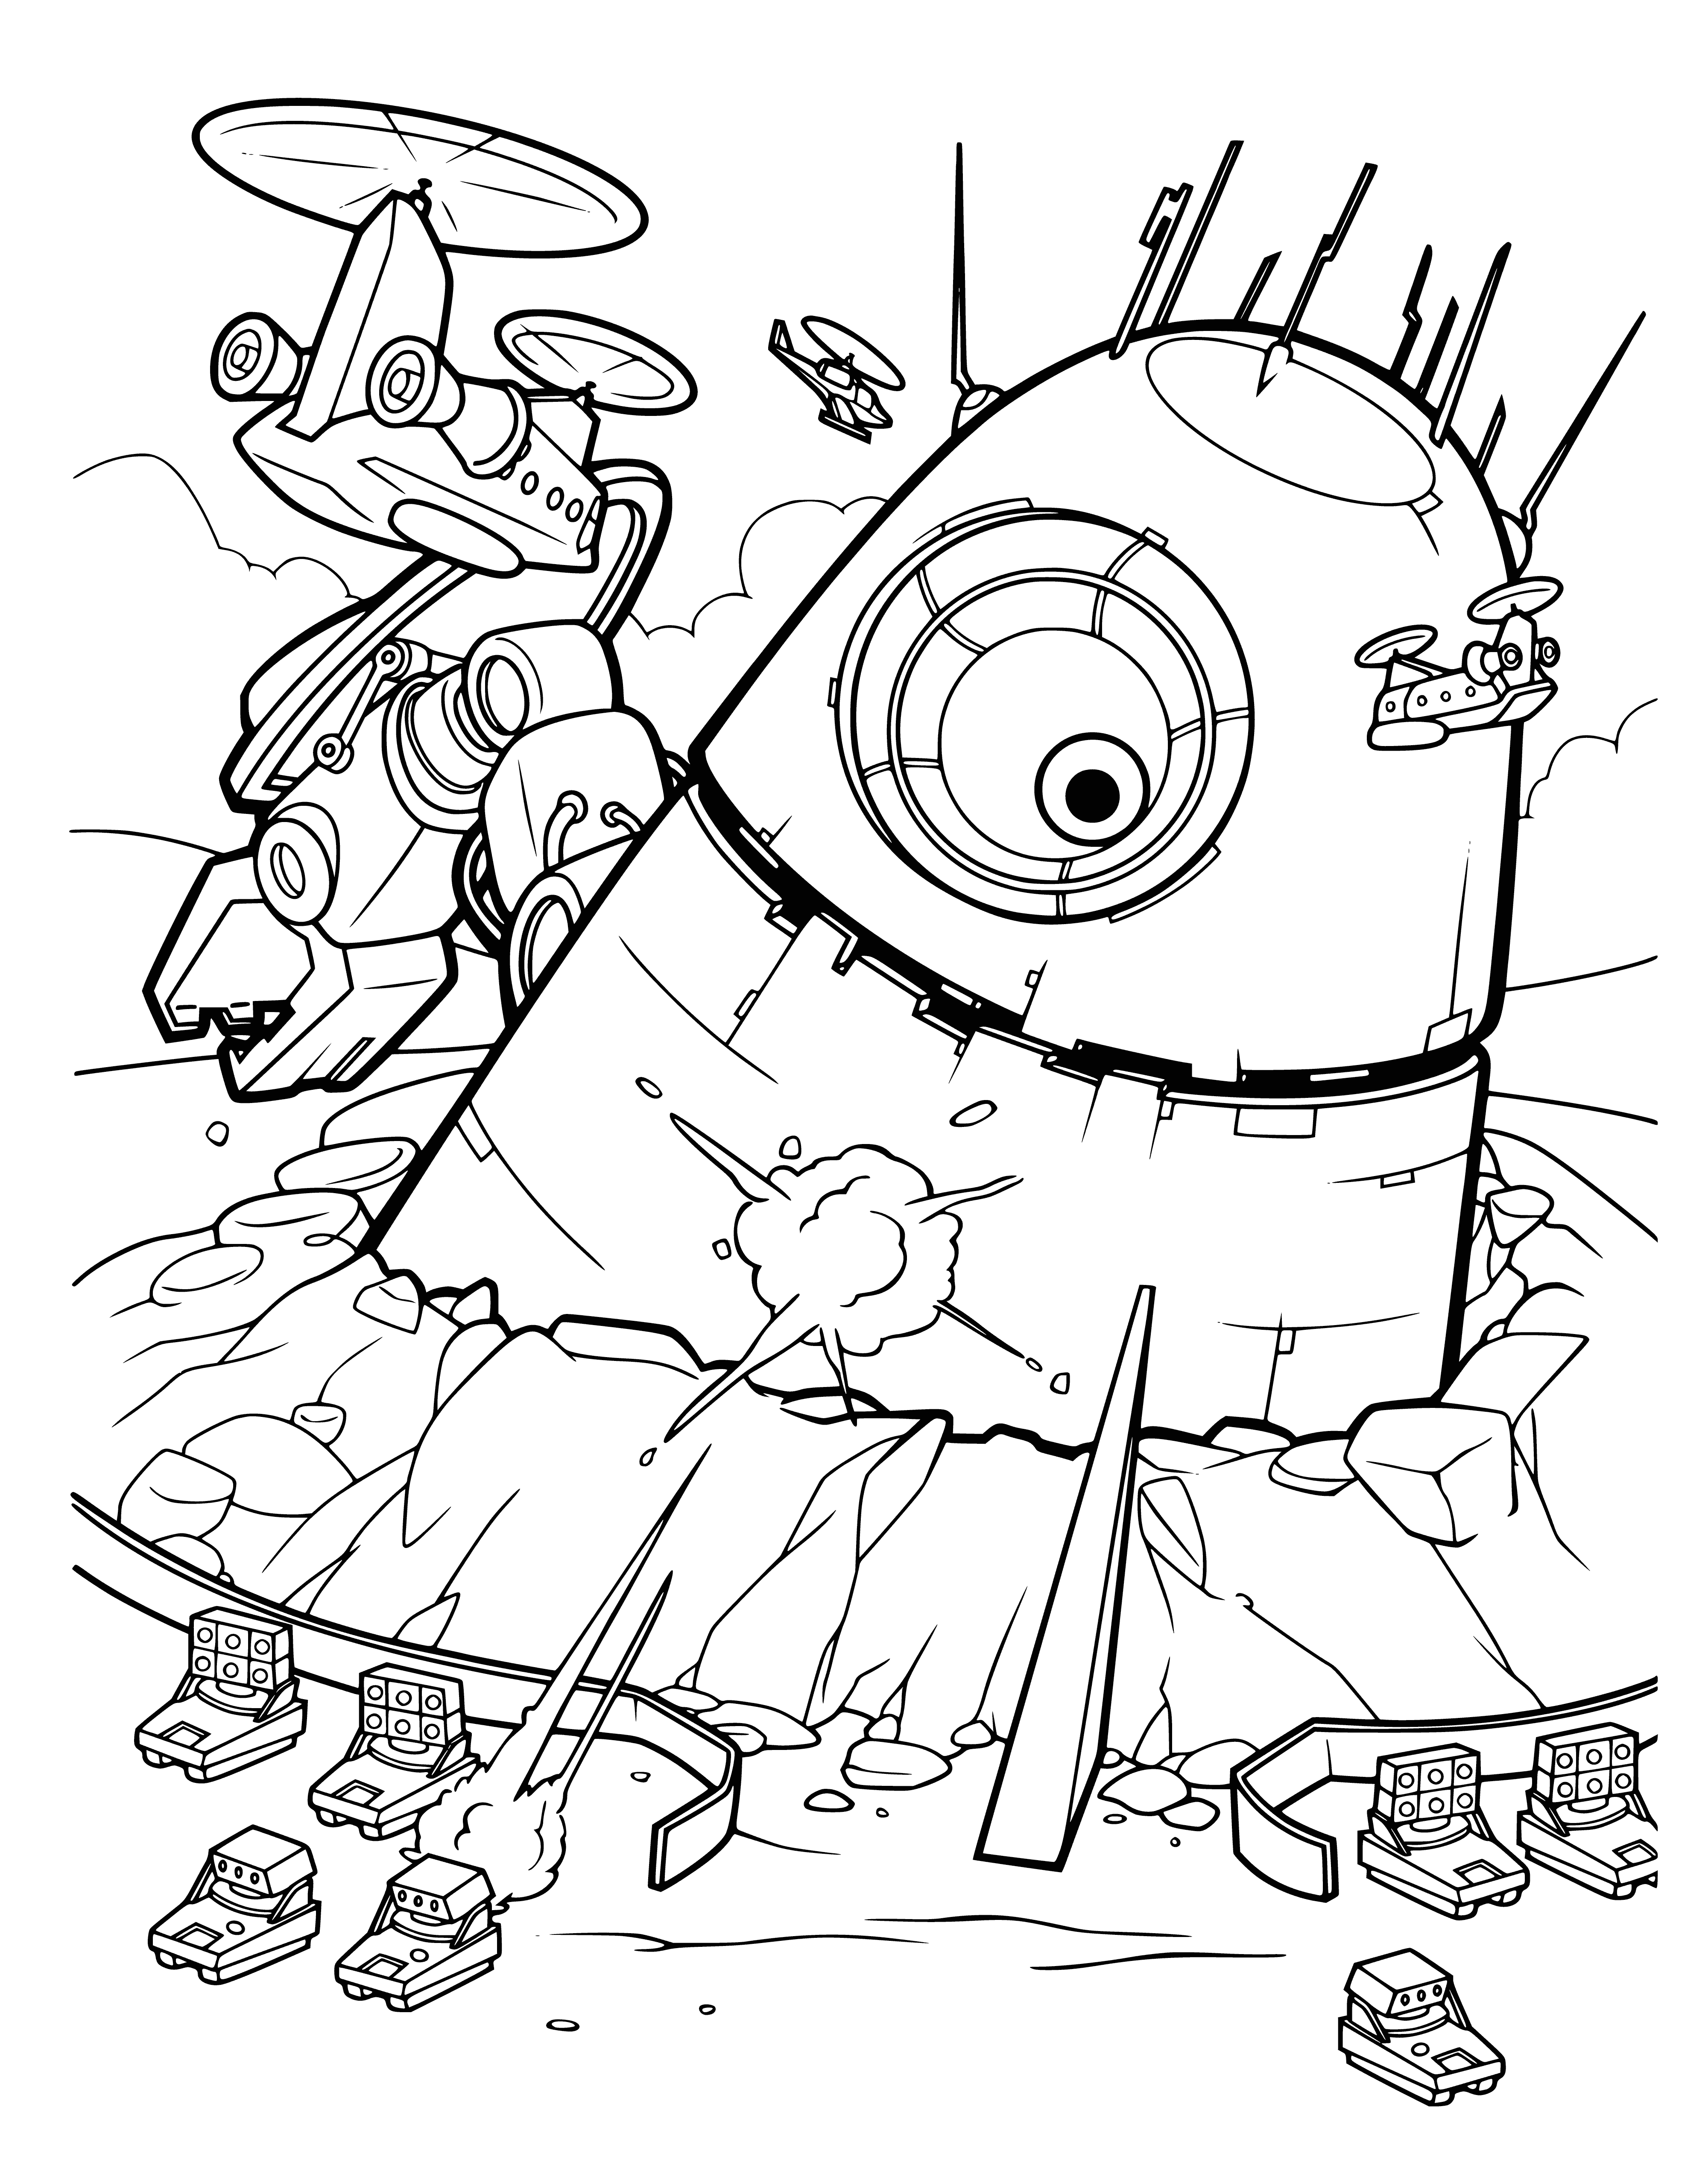 coloring page: Robot has round head w/ blue light, bulky arms/legs w/ sharp points, 3 fins on back & chest has open control panel.